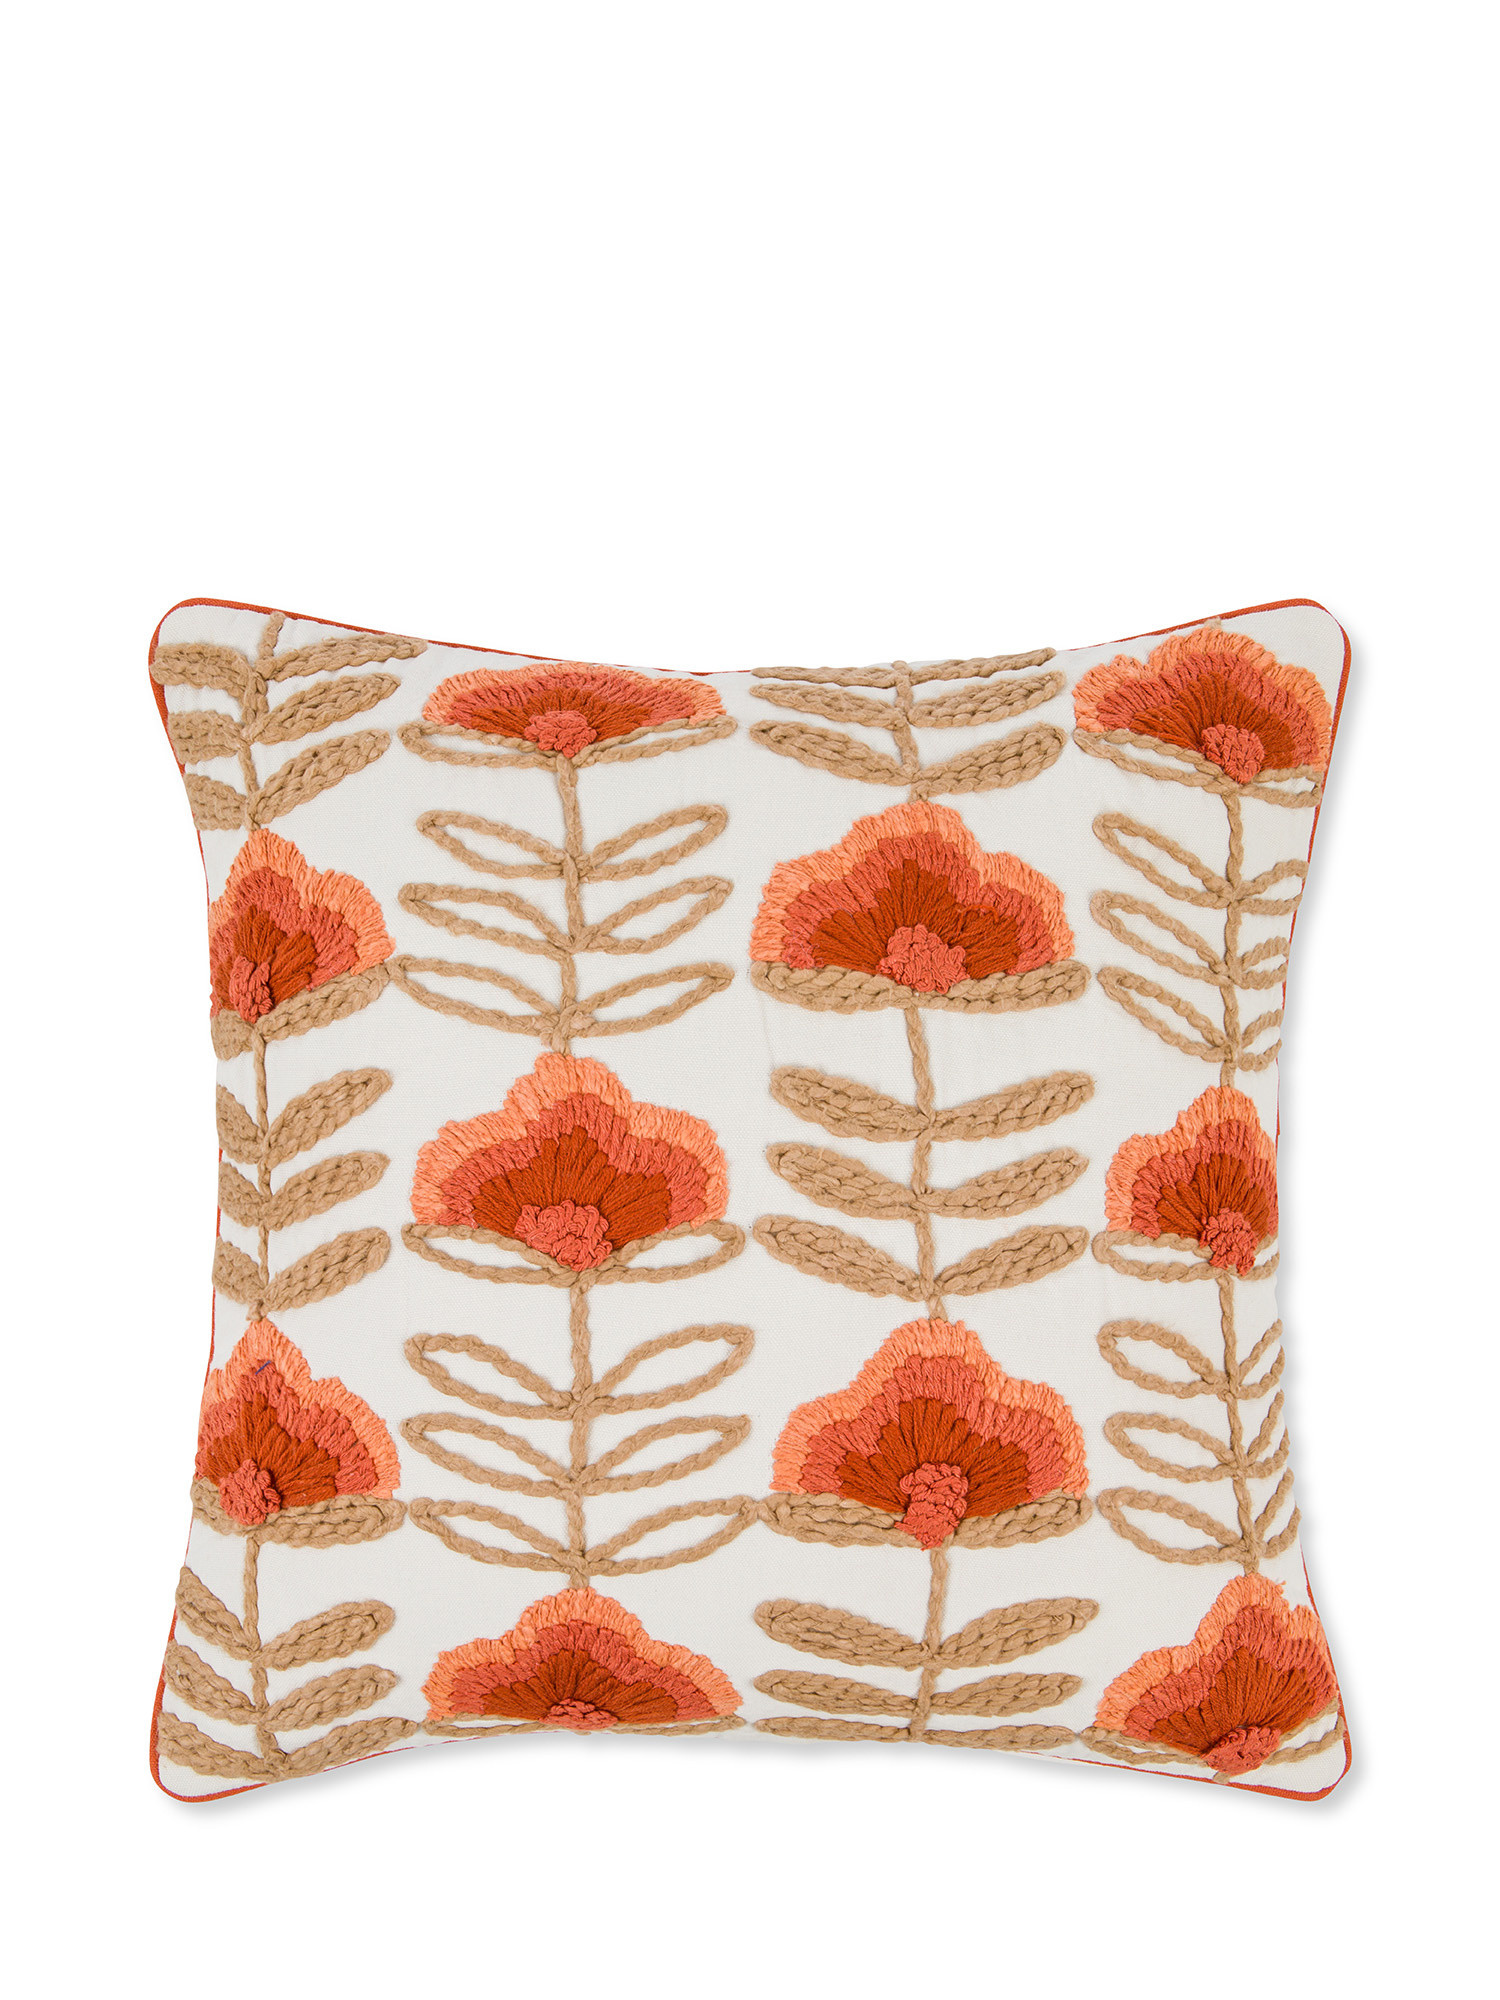 Embroidered cushion with vintage pattern 45x45cm, Orange, large image number 0